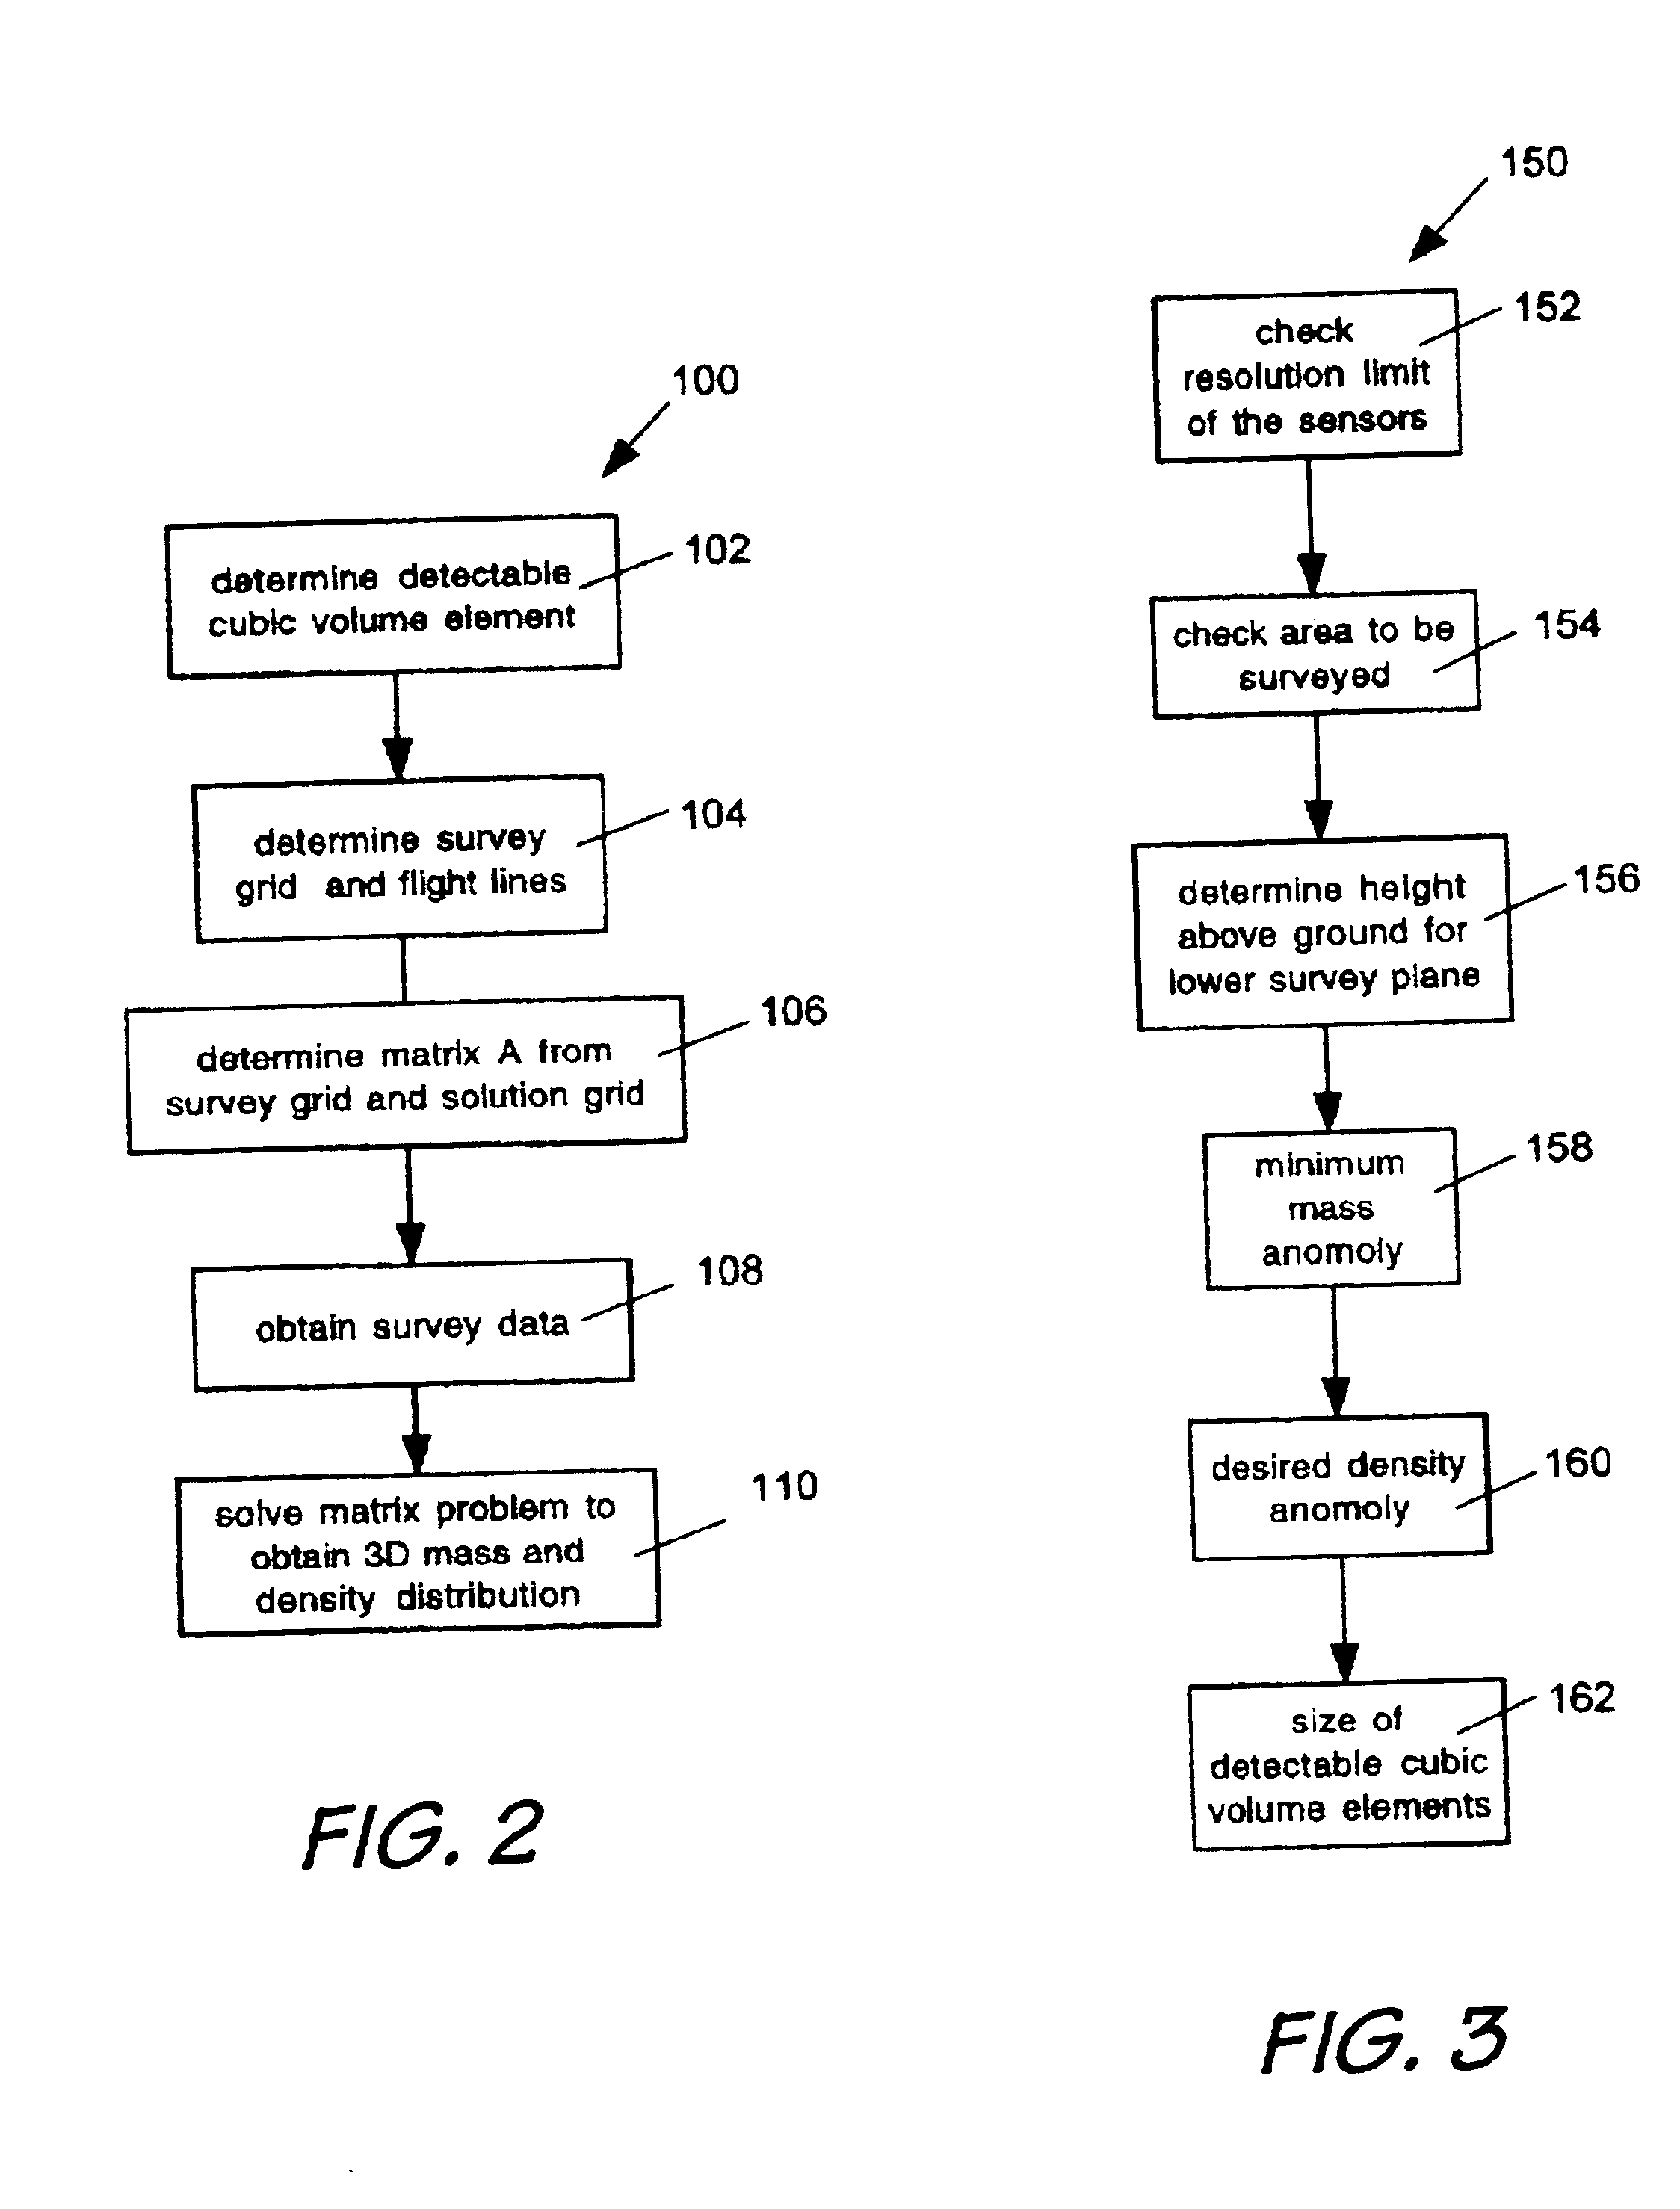 System and method for surveying underground density distributions